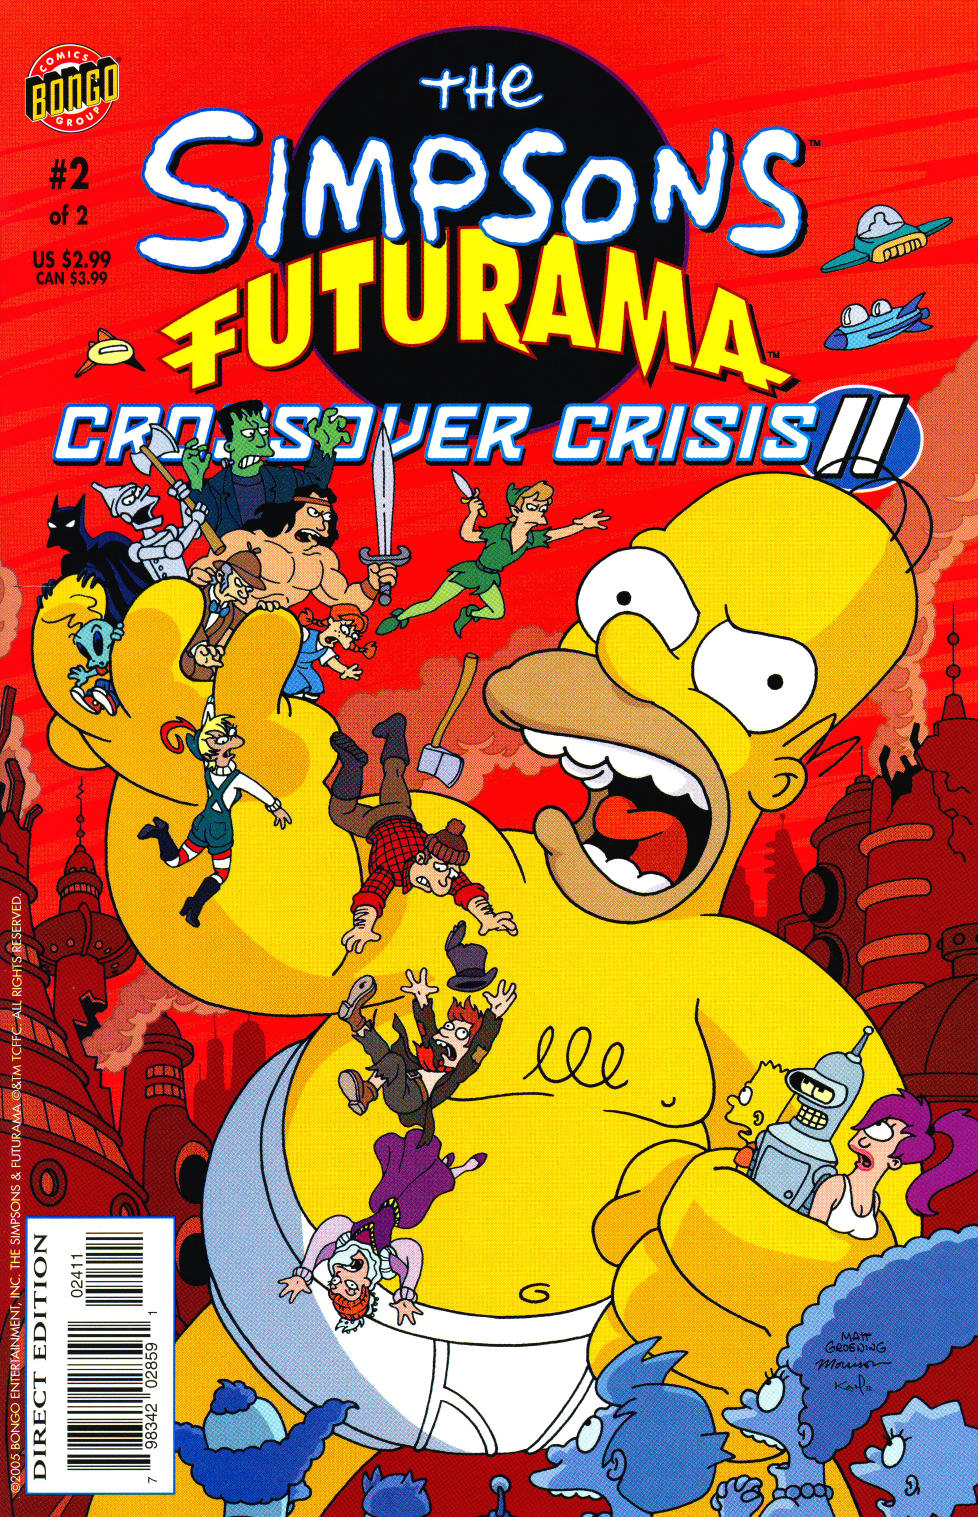 Read online The Simpsons/Futurama Crossover Crisis II comic -  Issue #2 - 1